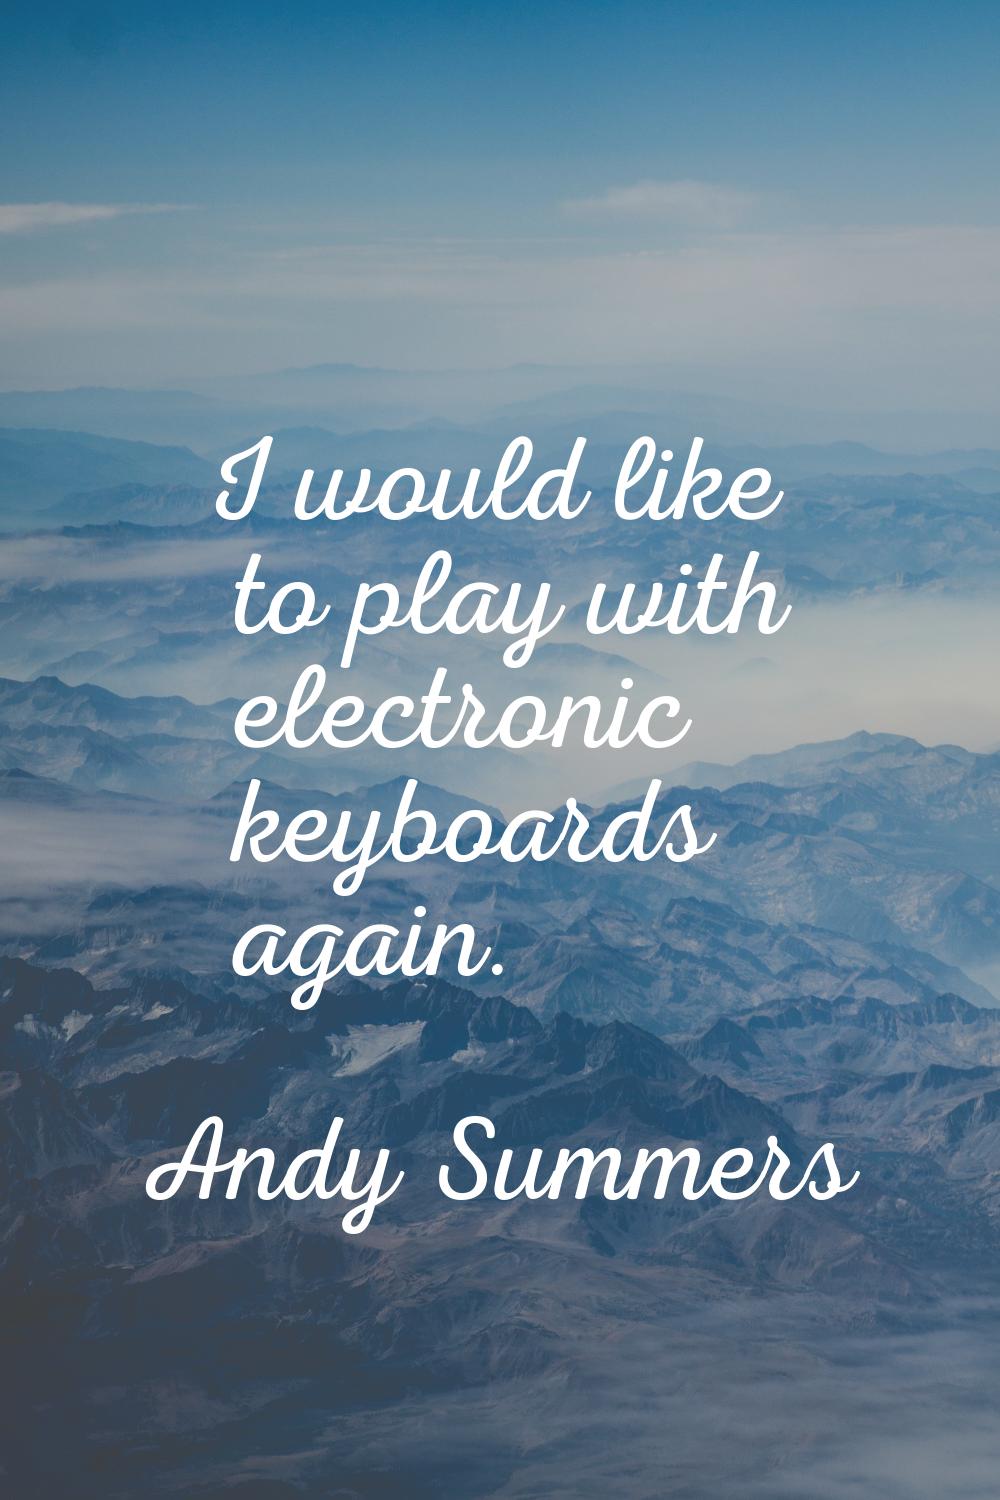 I would like to play with electronic keyboards again.